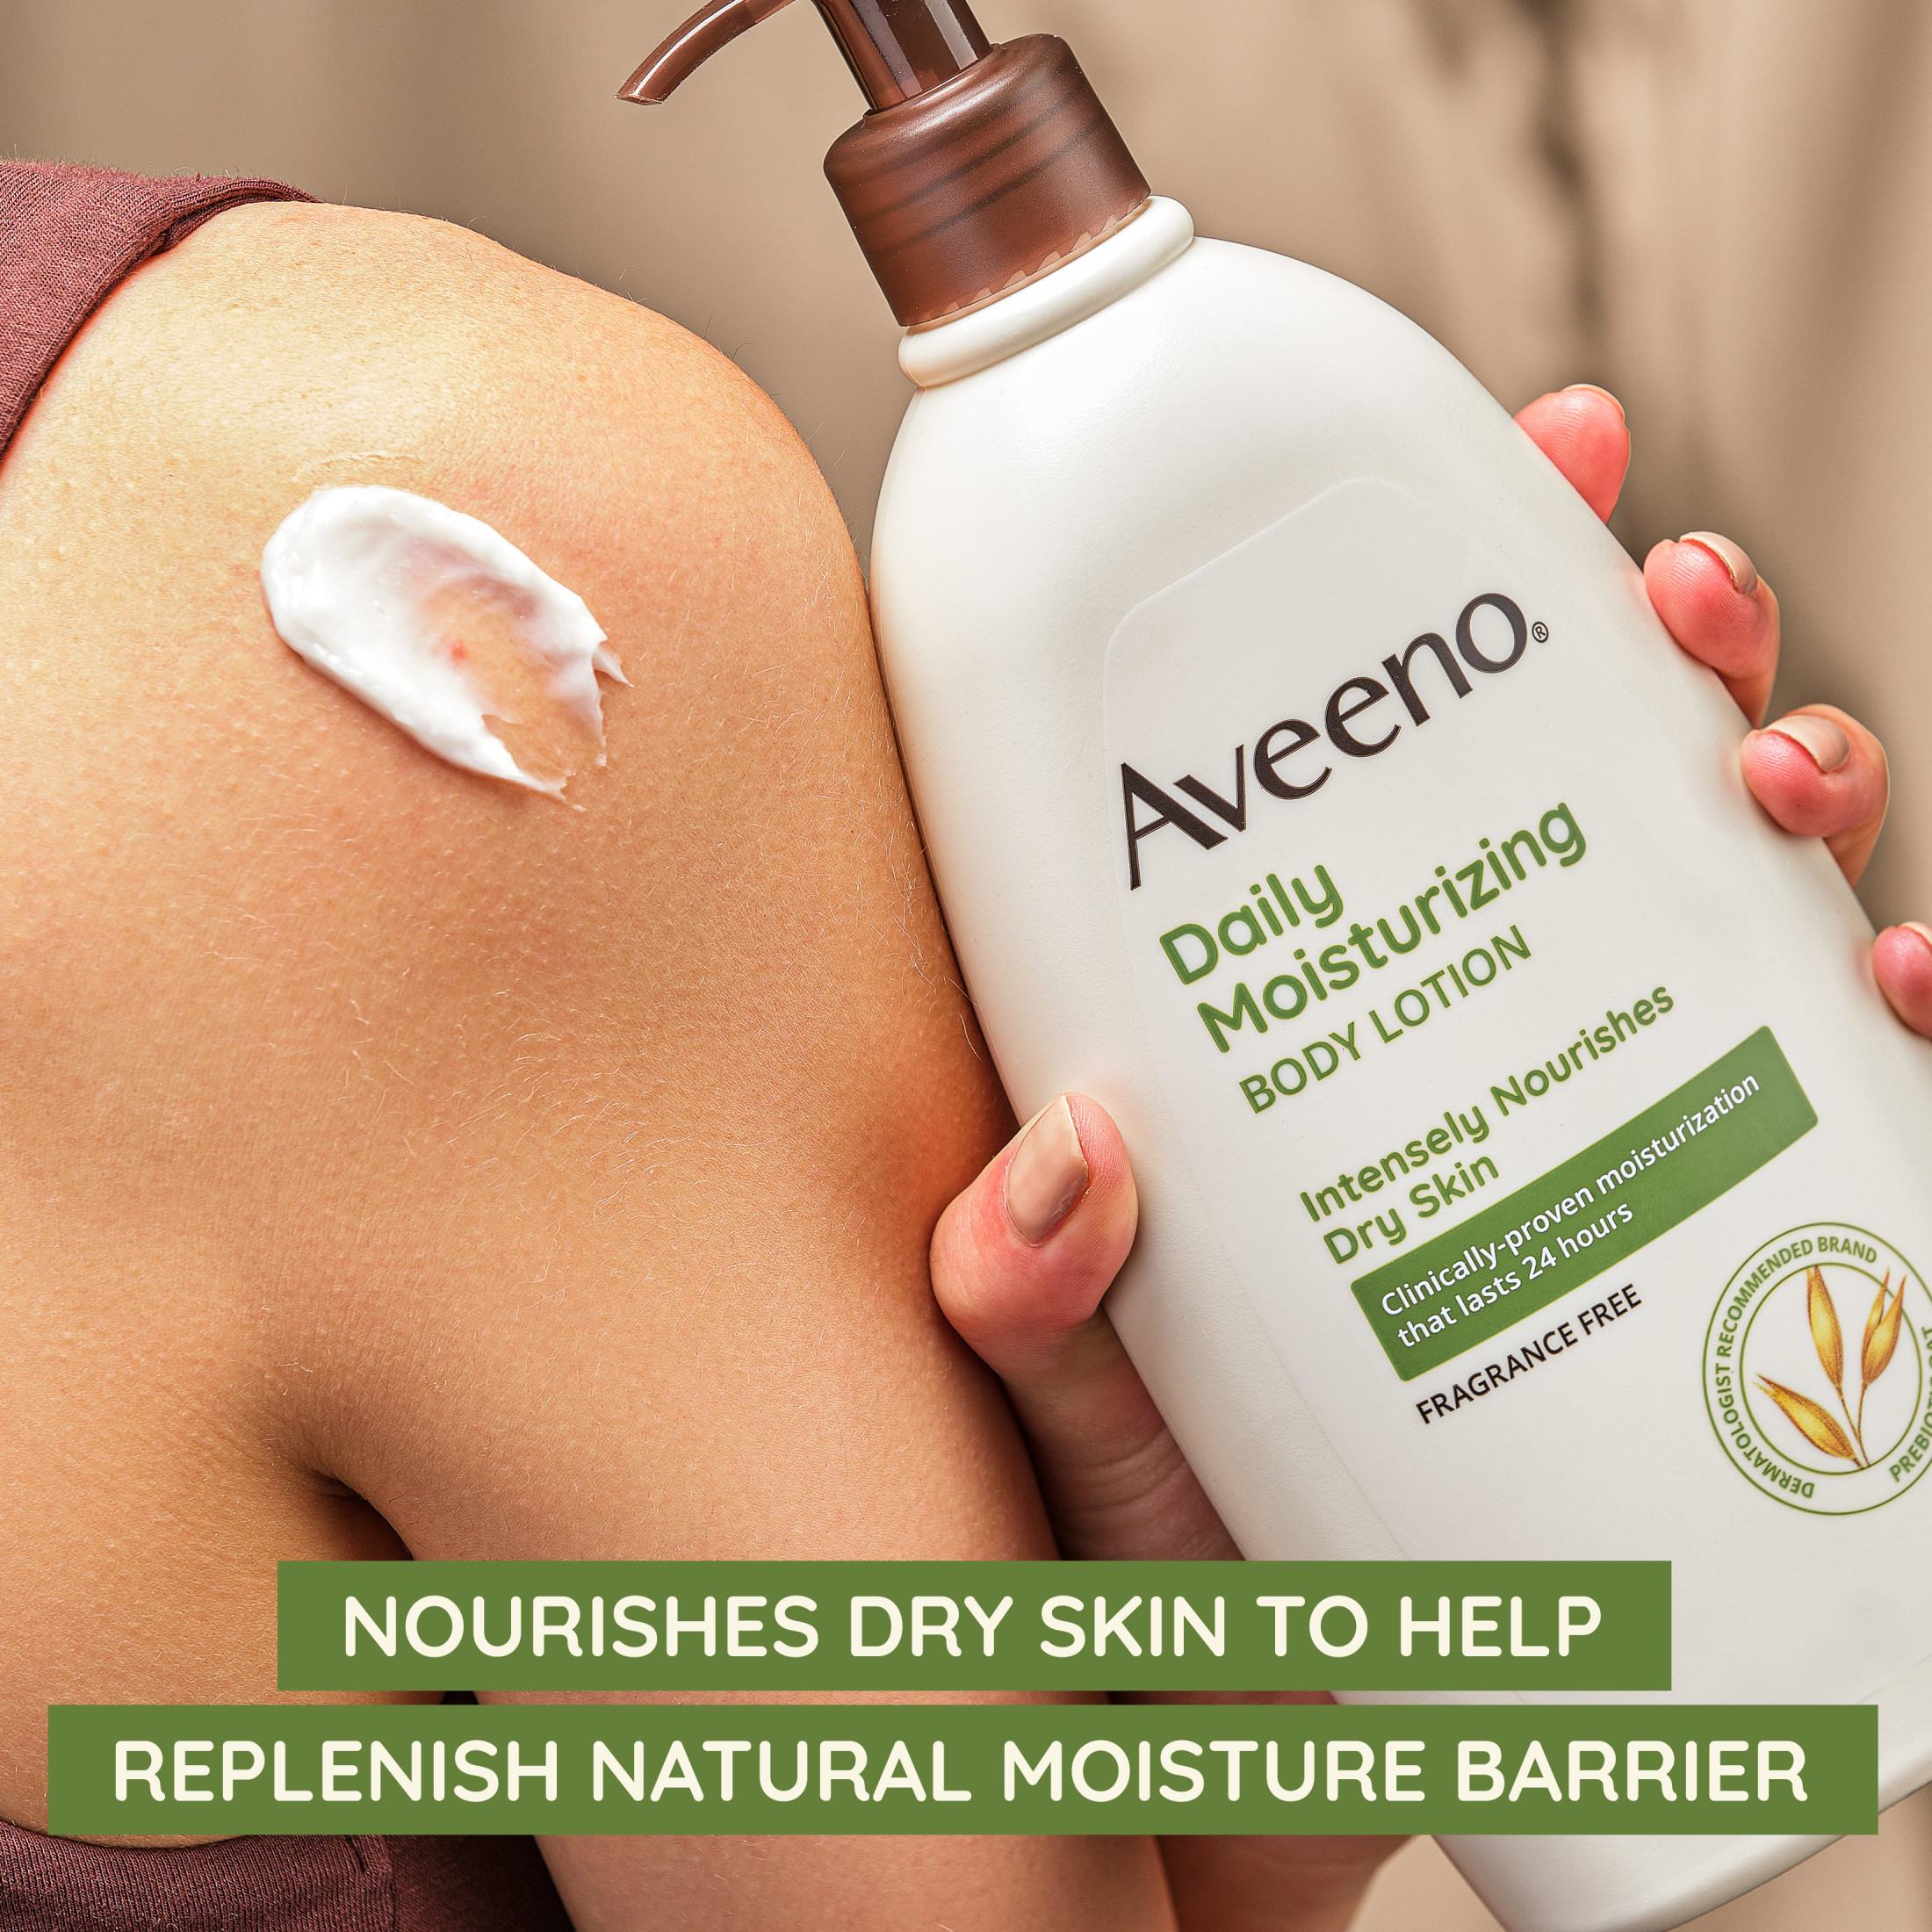 Aveeno Daily Moisturizing Body Lotion with Oat for Dry Skin, 18 fl oz - image 5 of 11